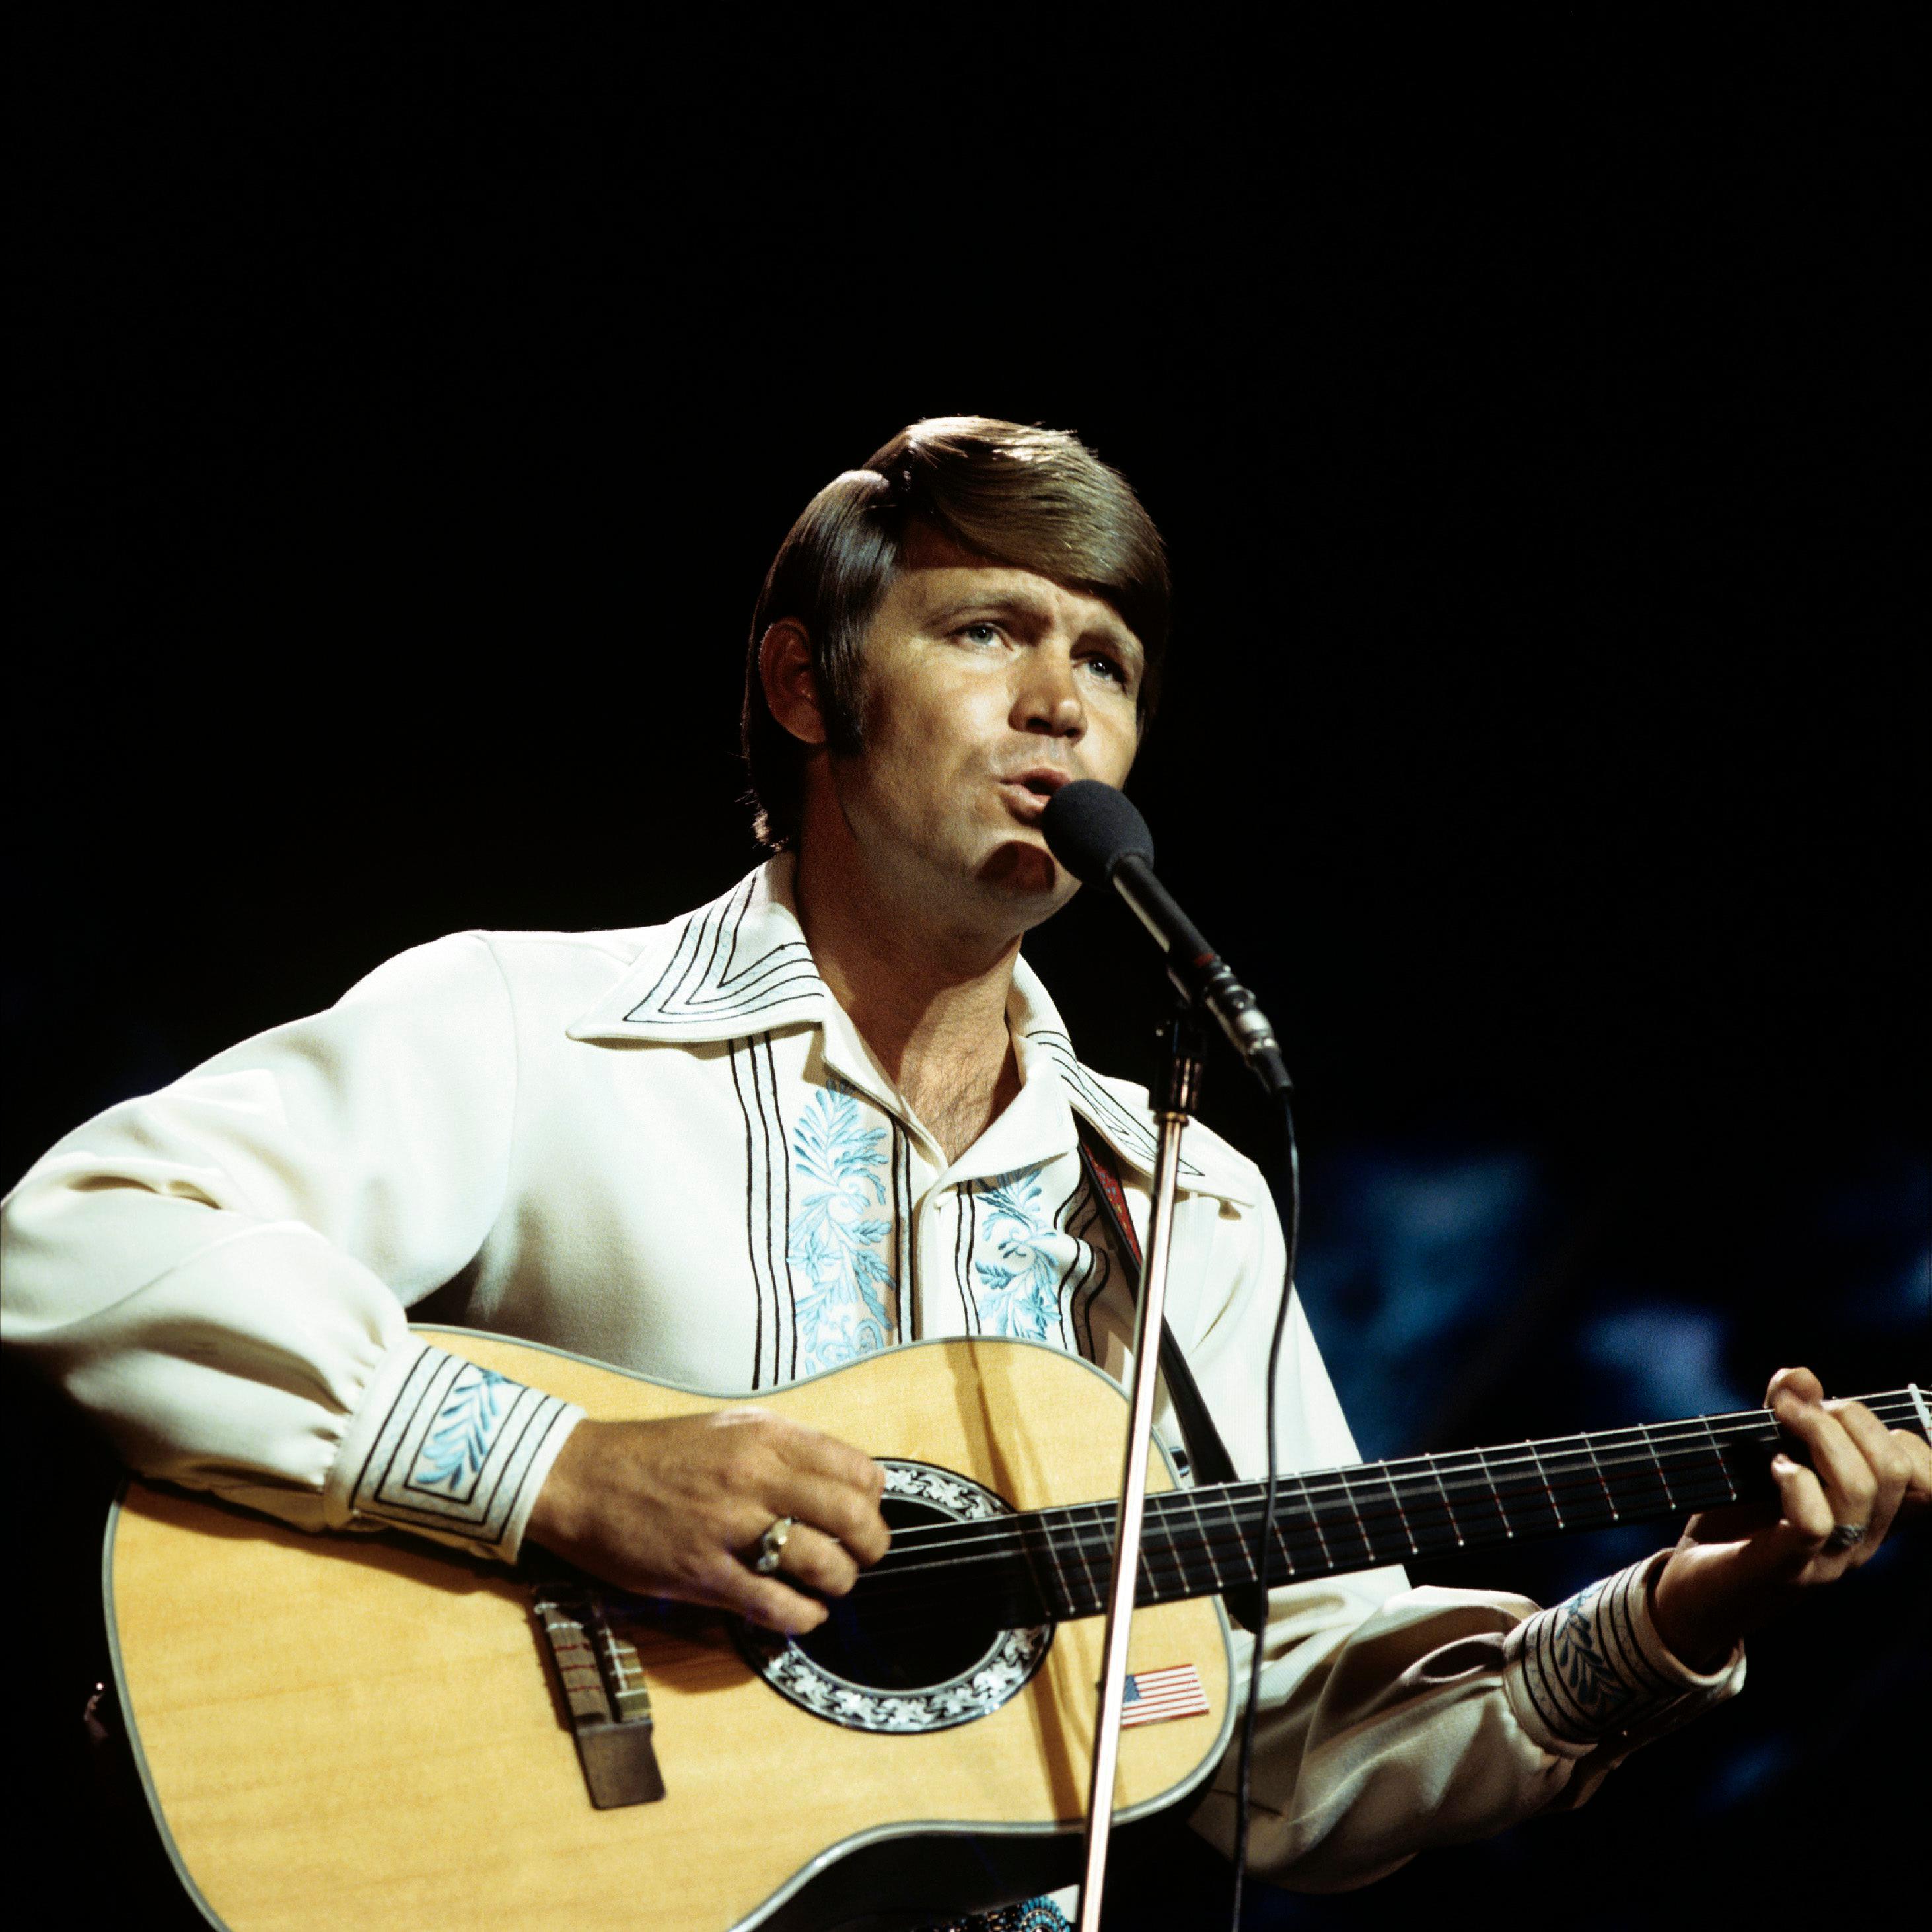 The wonderful Glen Campbell – our catalogue includes several of his works